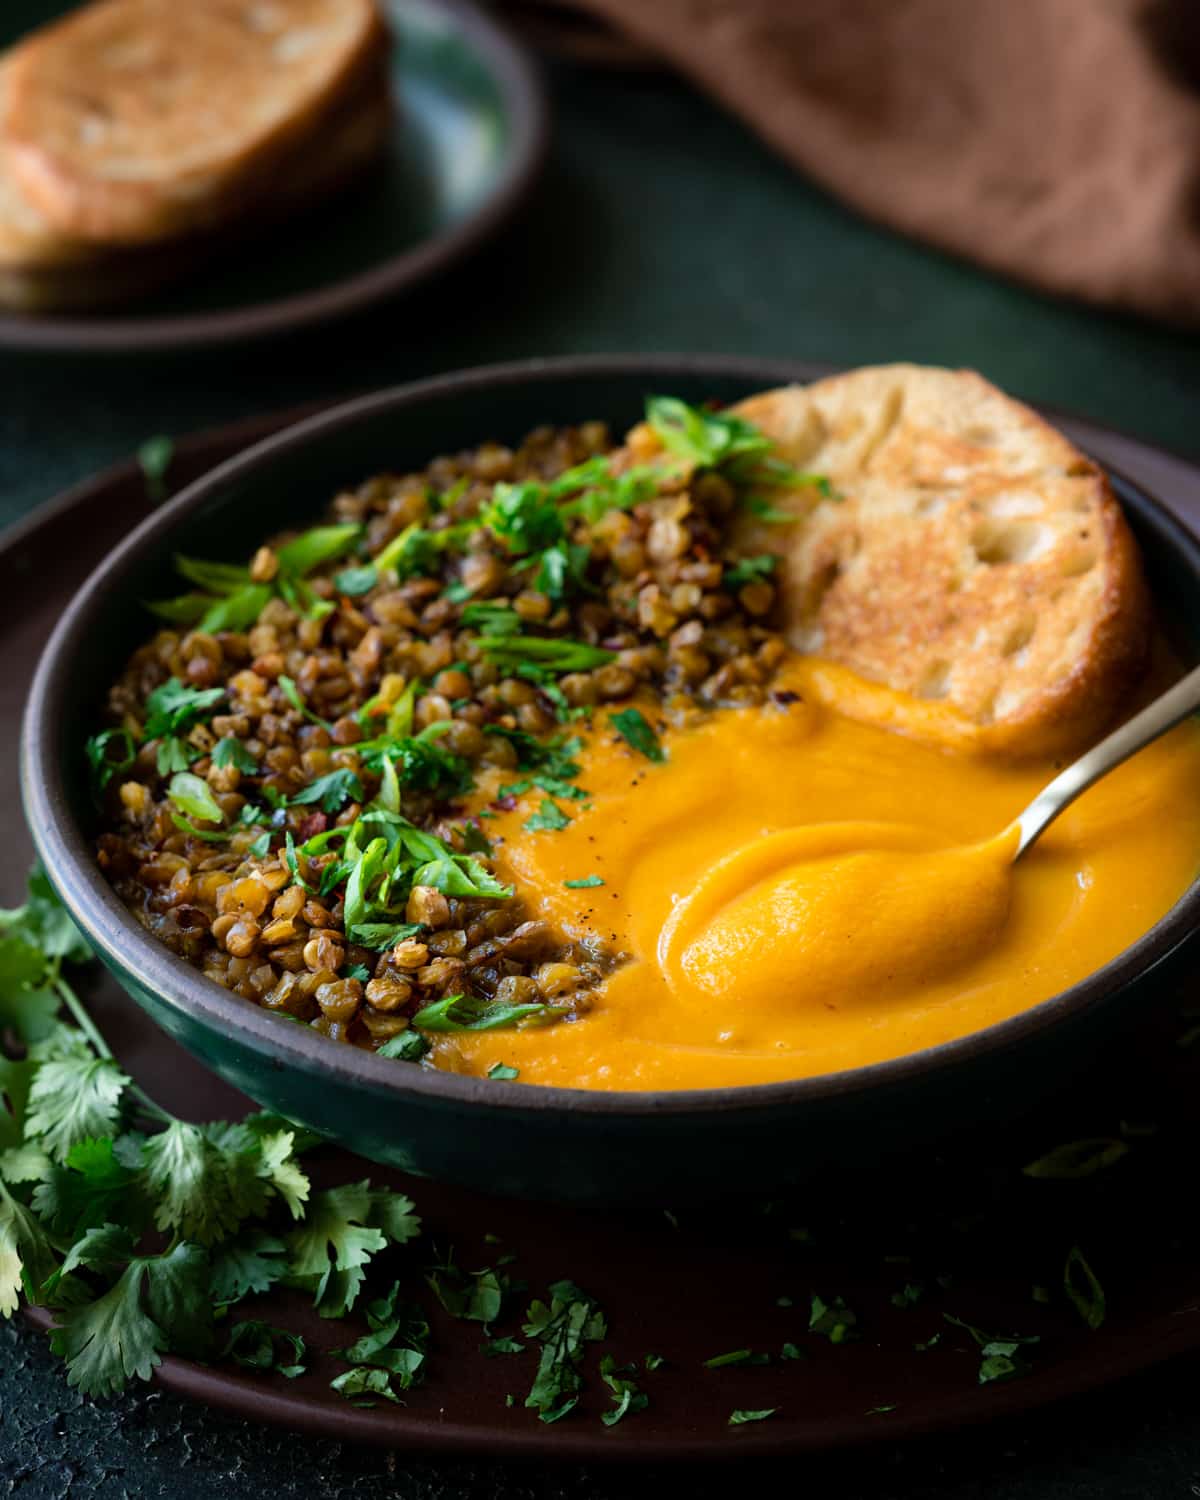 spoon dug into a bowl of creamy butternut squash soup, topped with lentils and herbs.